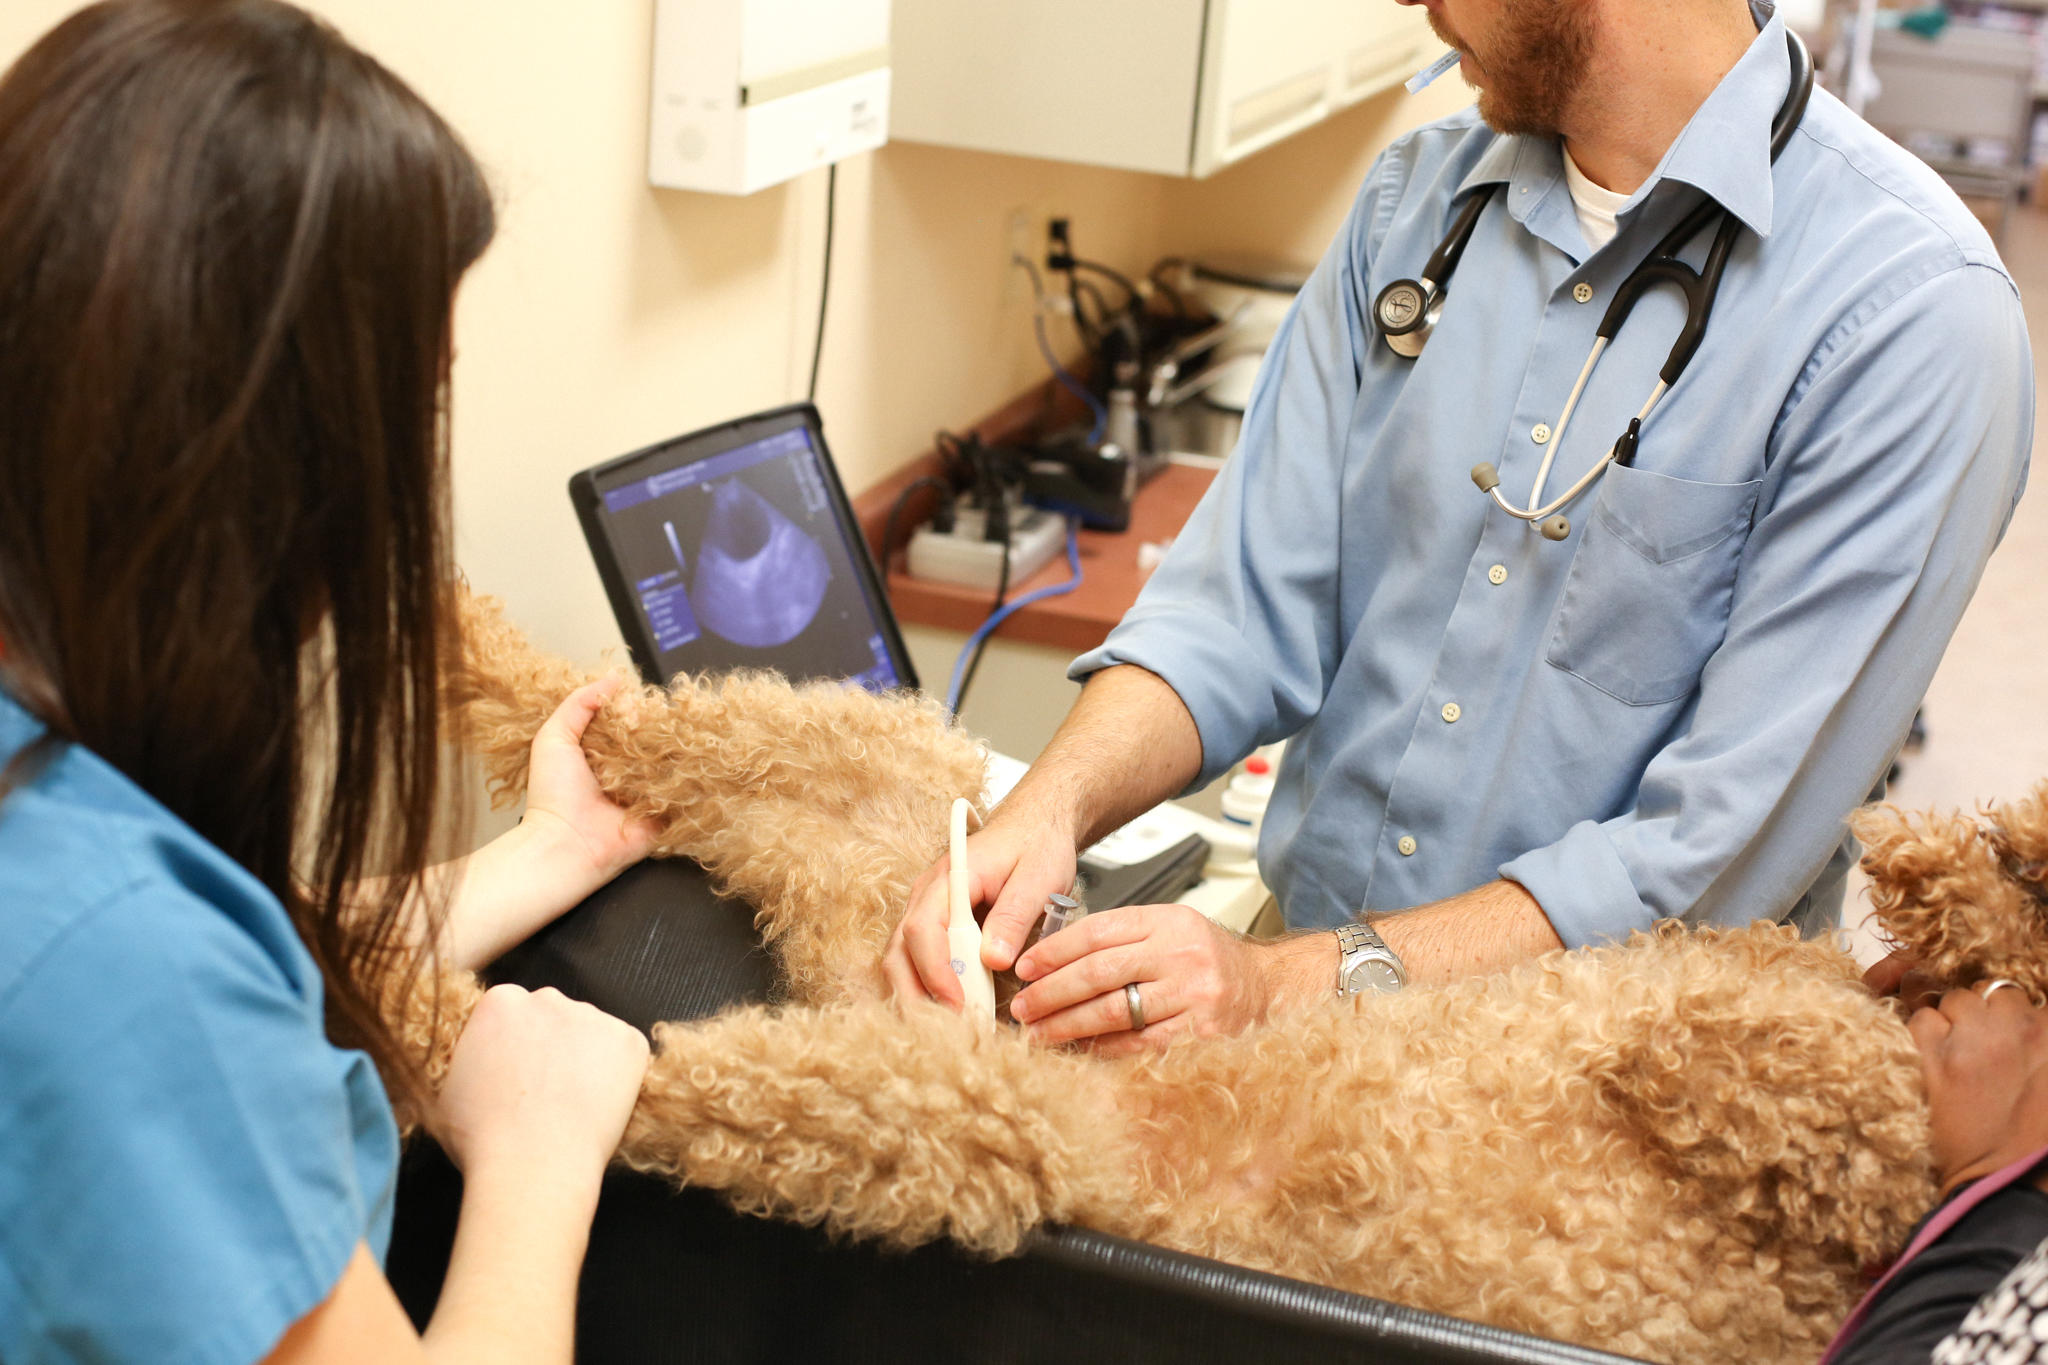 We’ve invested in advanced digital radiography and ultrasound technology to provide the highest level of care for your pets.